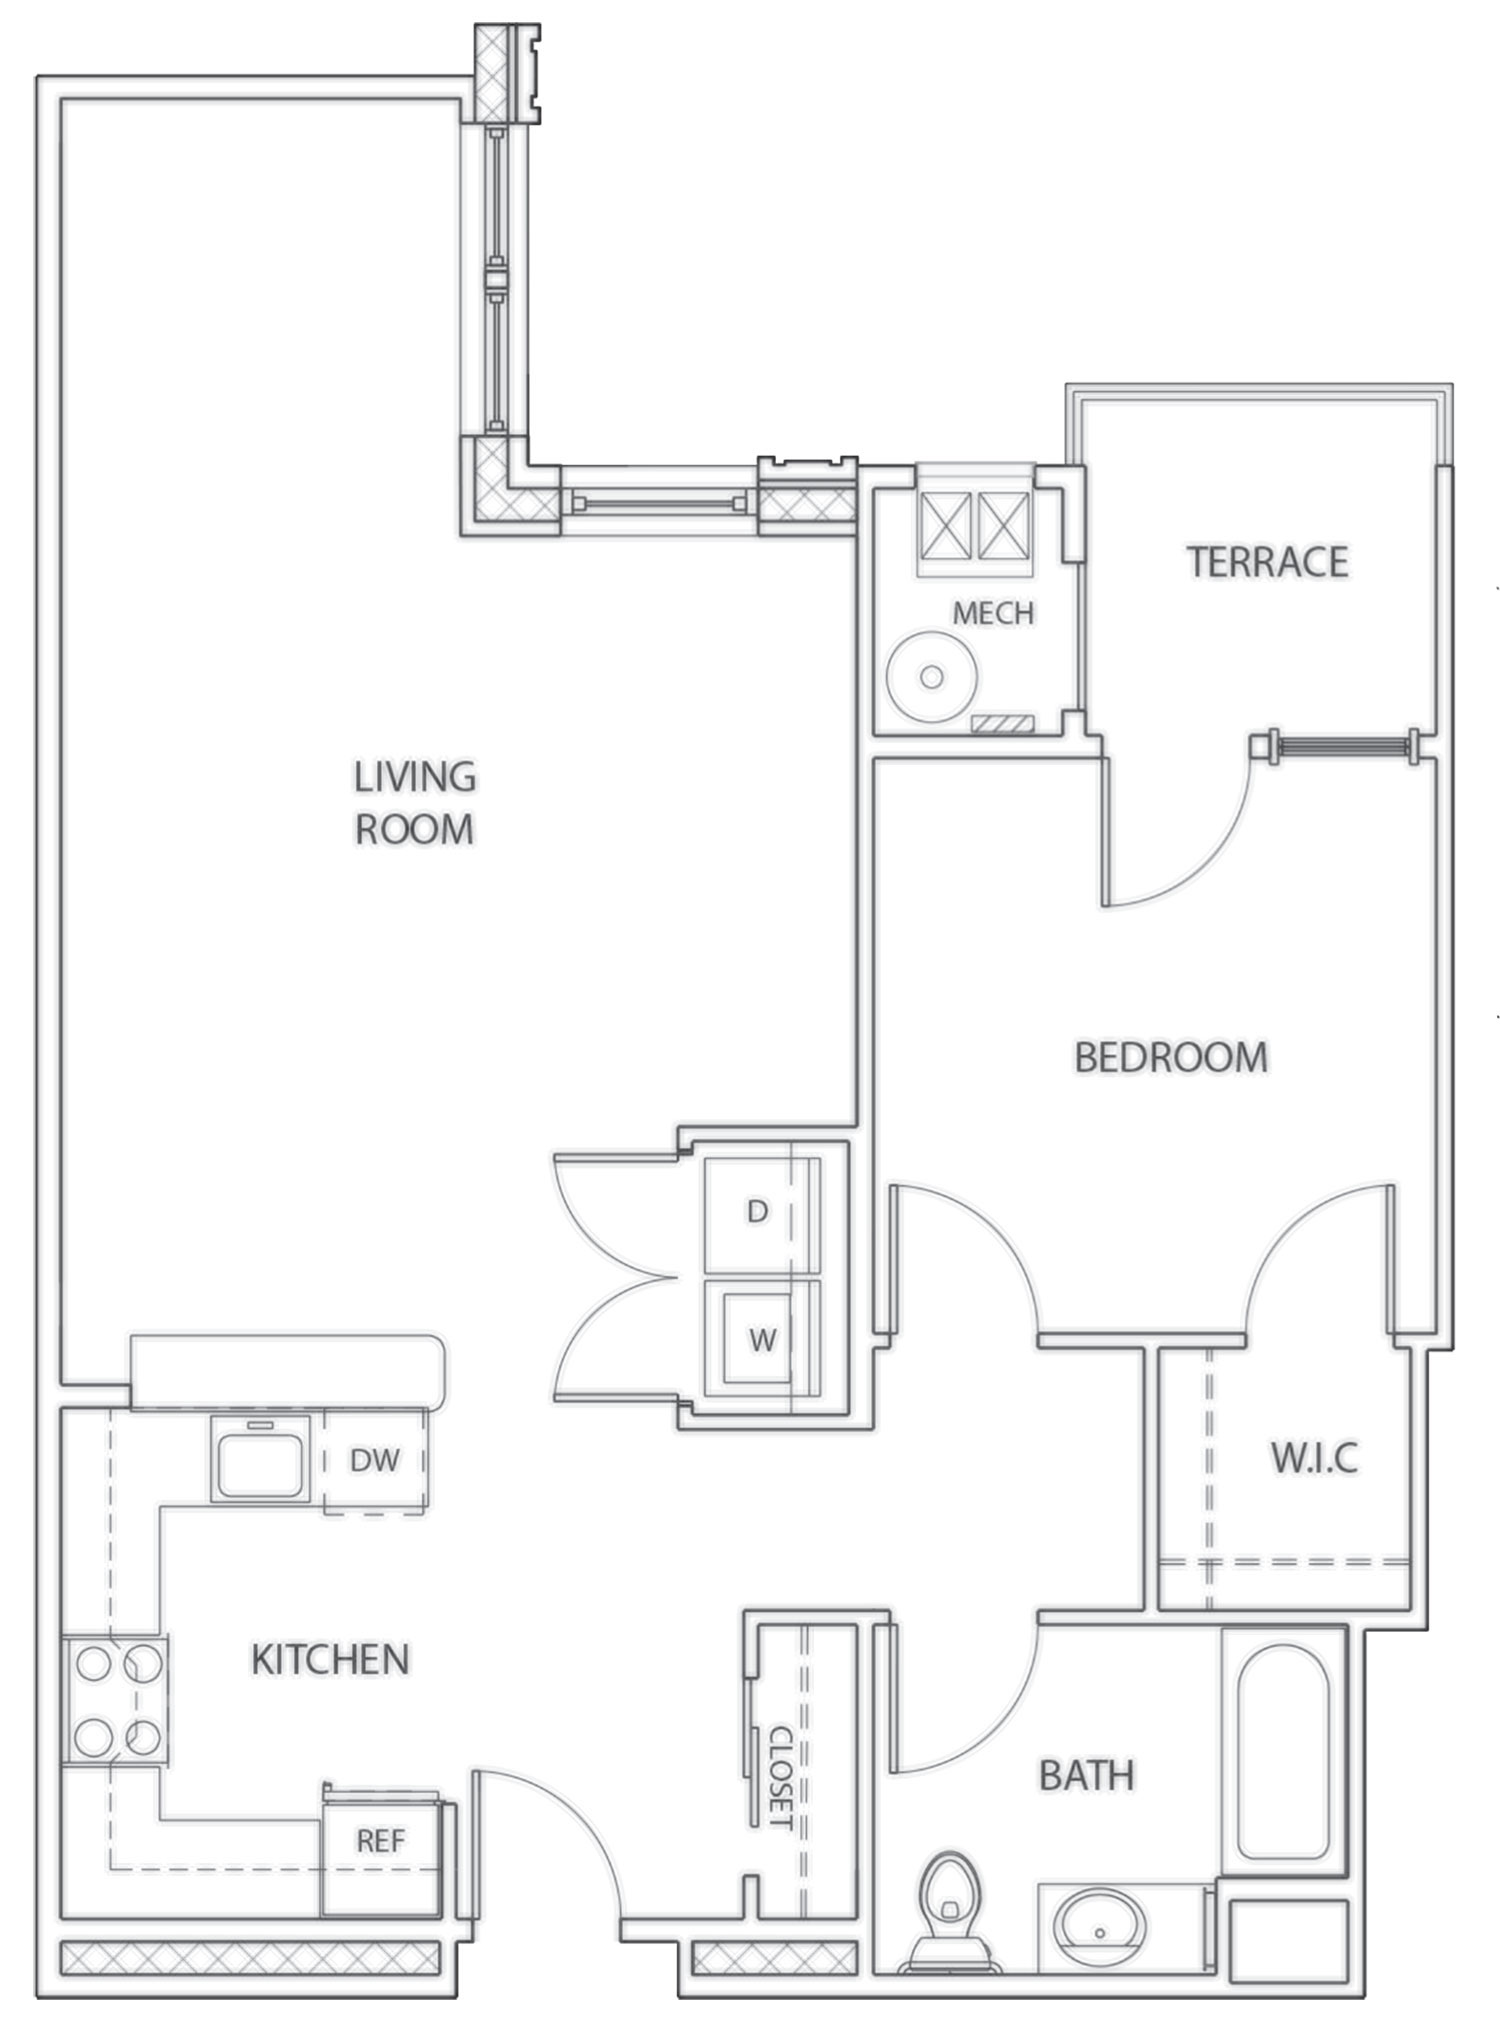 Floor plan for a 1 bedroom apartment in North Jersey